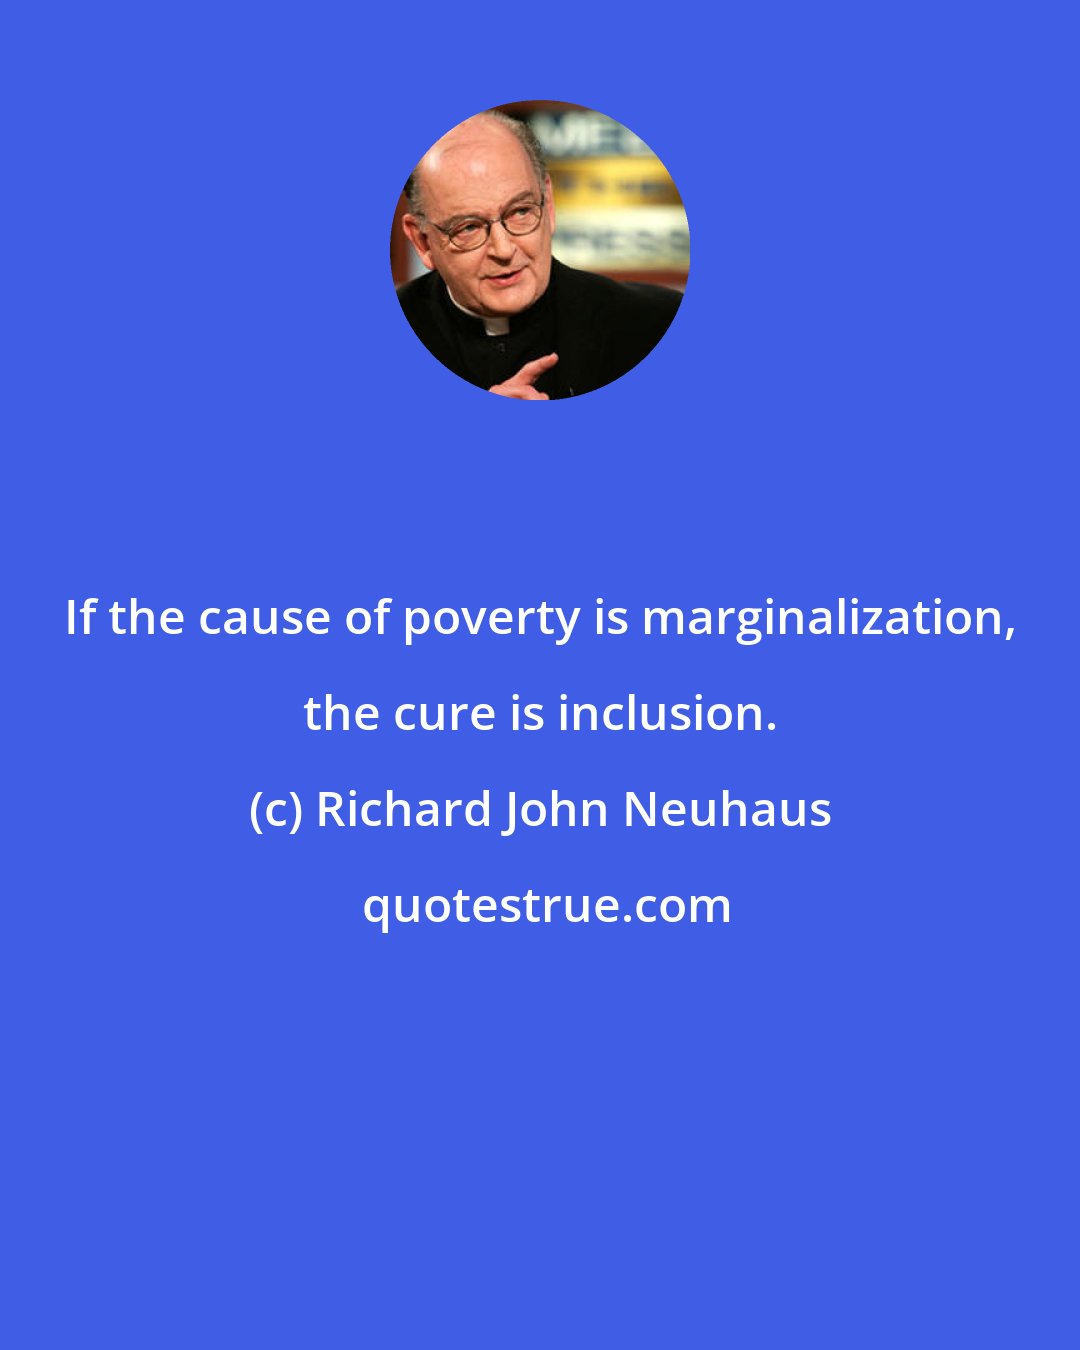 Richard John Neuhaus: If the cause of poverty is marginalization, the cure is inclusion.